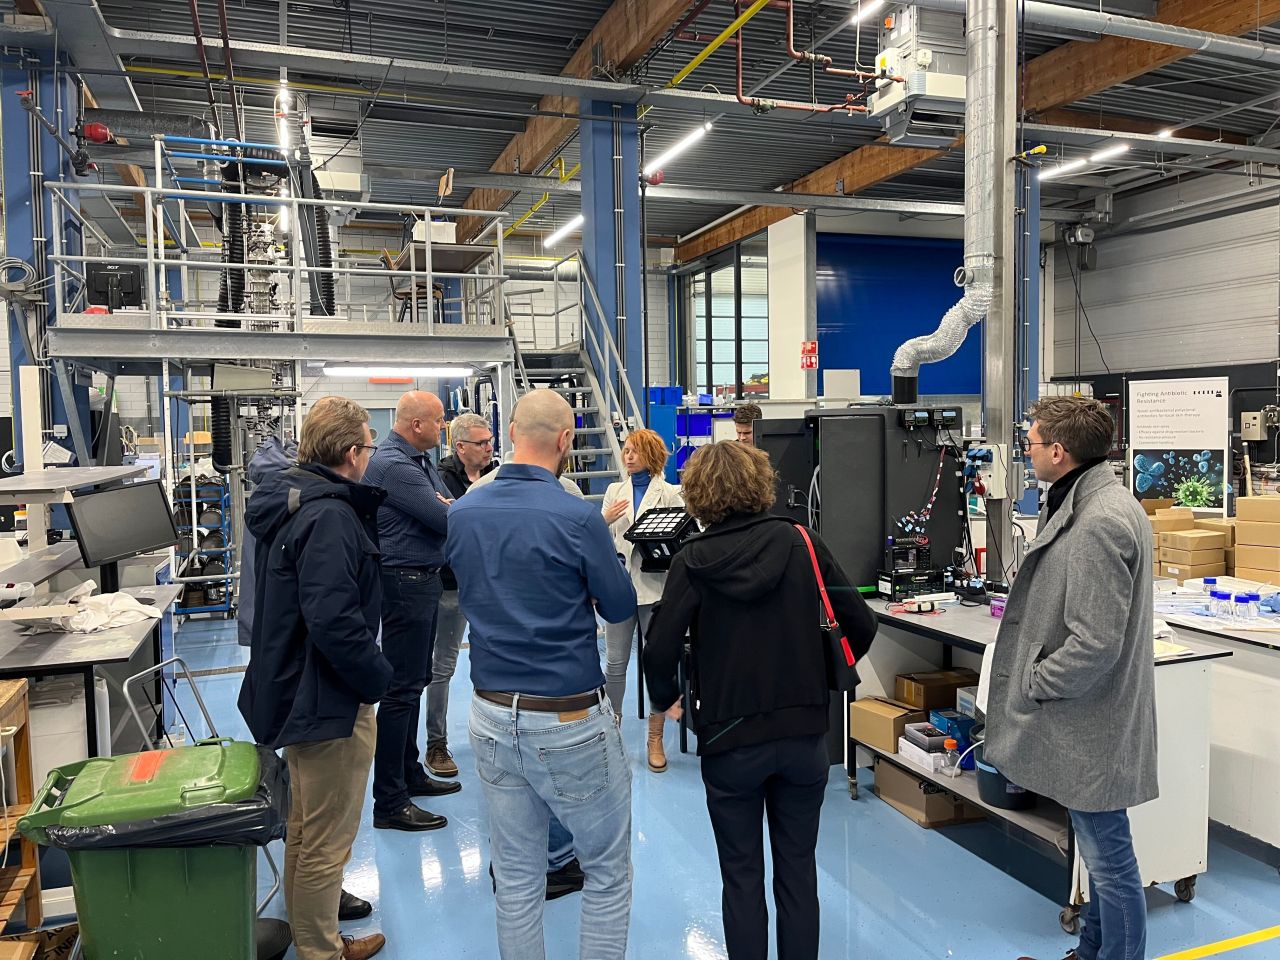 A group tours the new Aqucycl headquarters in the Netherlands